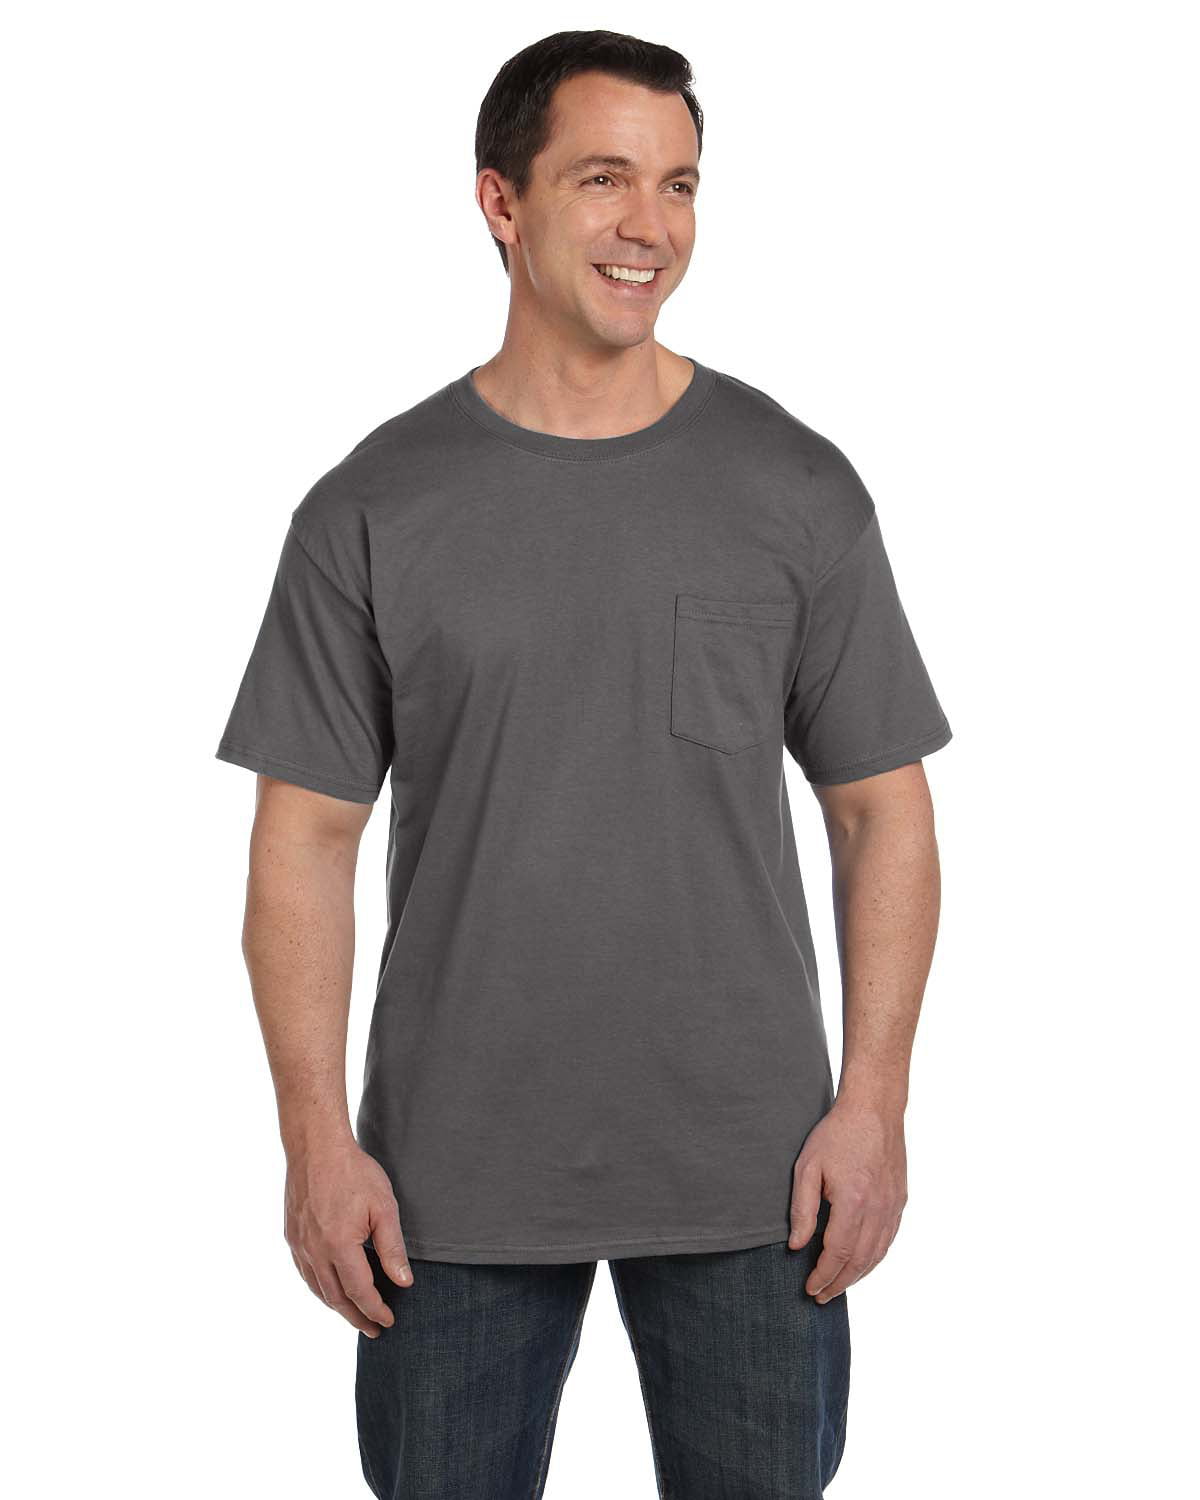 5190P Hanes Adult 6.1 oz Beefy-T with Pocket